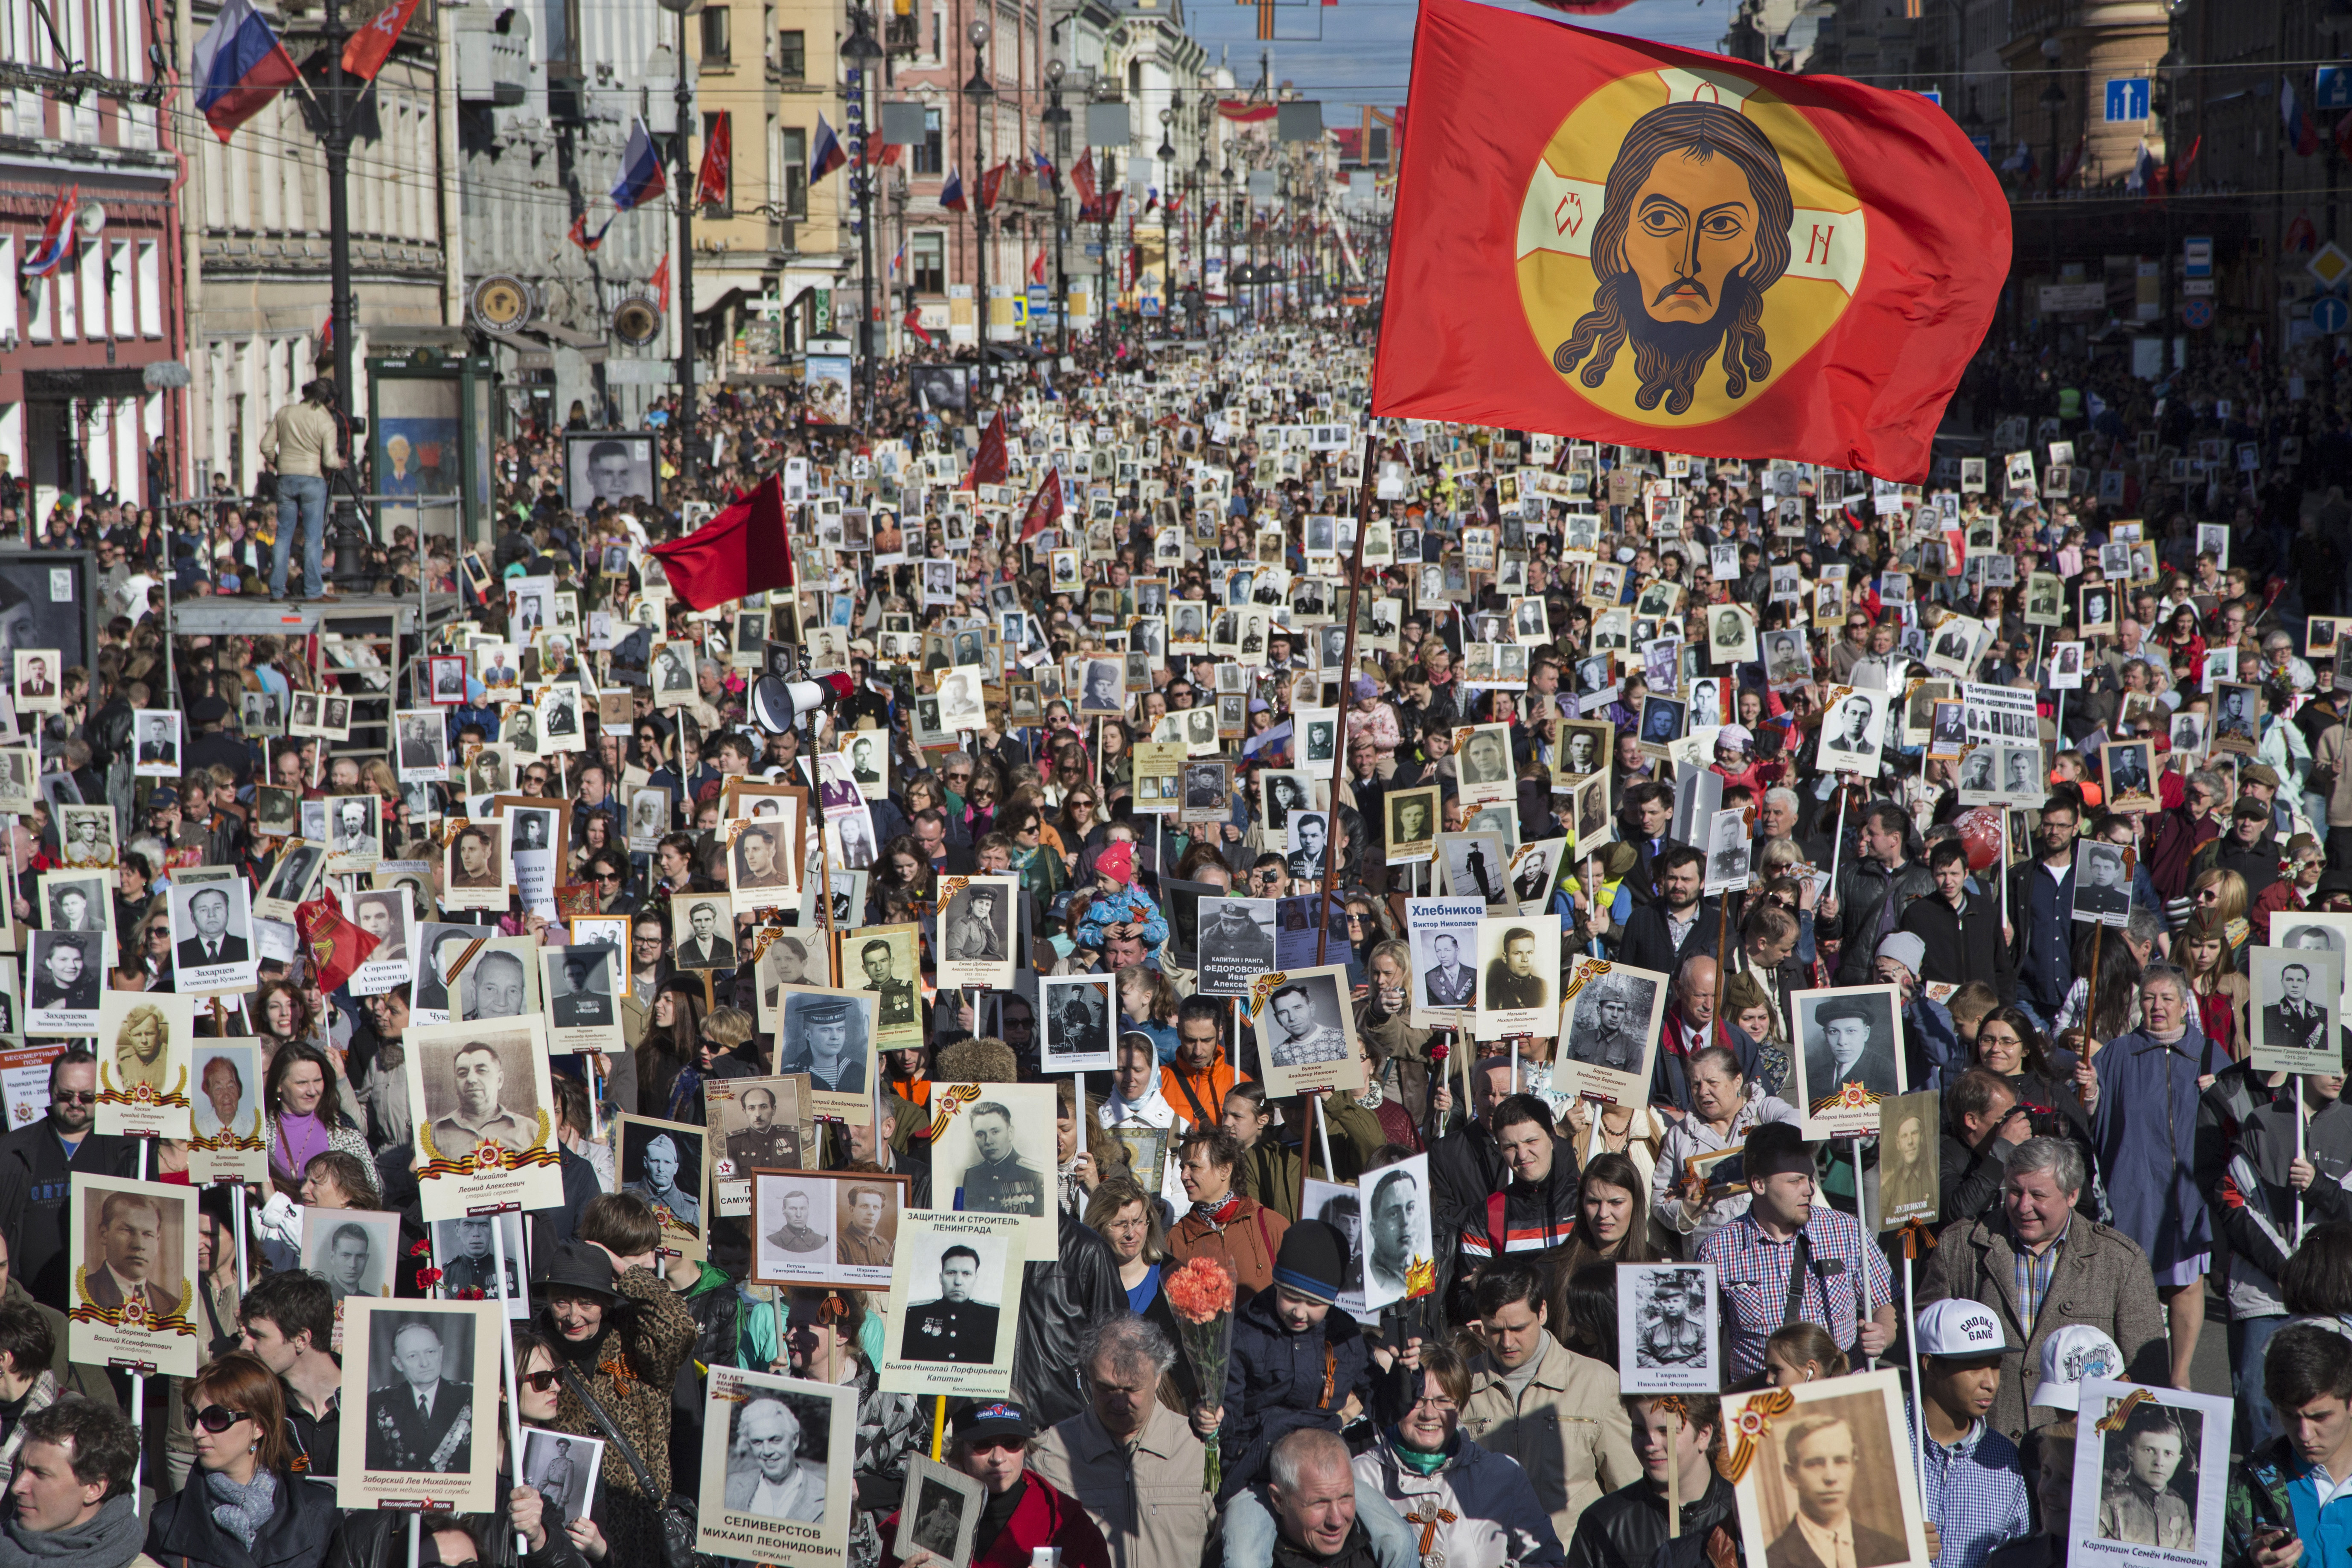 Local residents carry portraits of their ancestors, participants in World War Two as they celebrate the 70th anniversary of the defeat of the Nazis in World War II in St. Petersburg, Russia, Saturday, May 9, 2015. About 100,000 people walked in central streets in a march named 'Immortal Regiment' while carrying portraits of their relatives who fought in World War Two. (AP Photo/Dmitry Lovetsky)